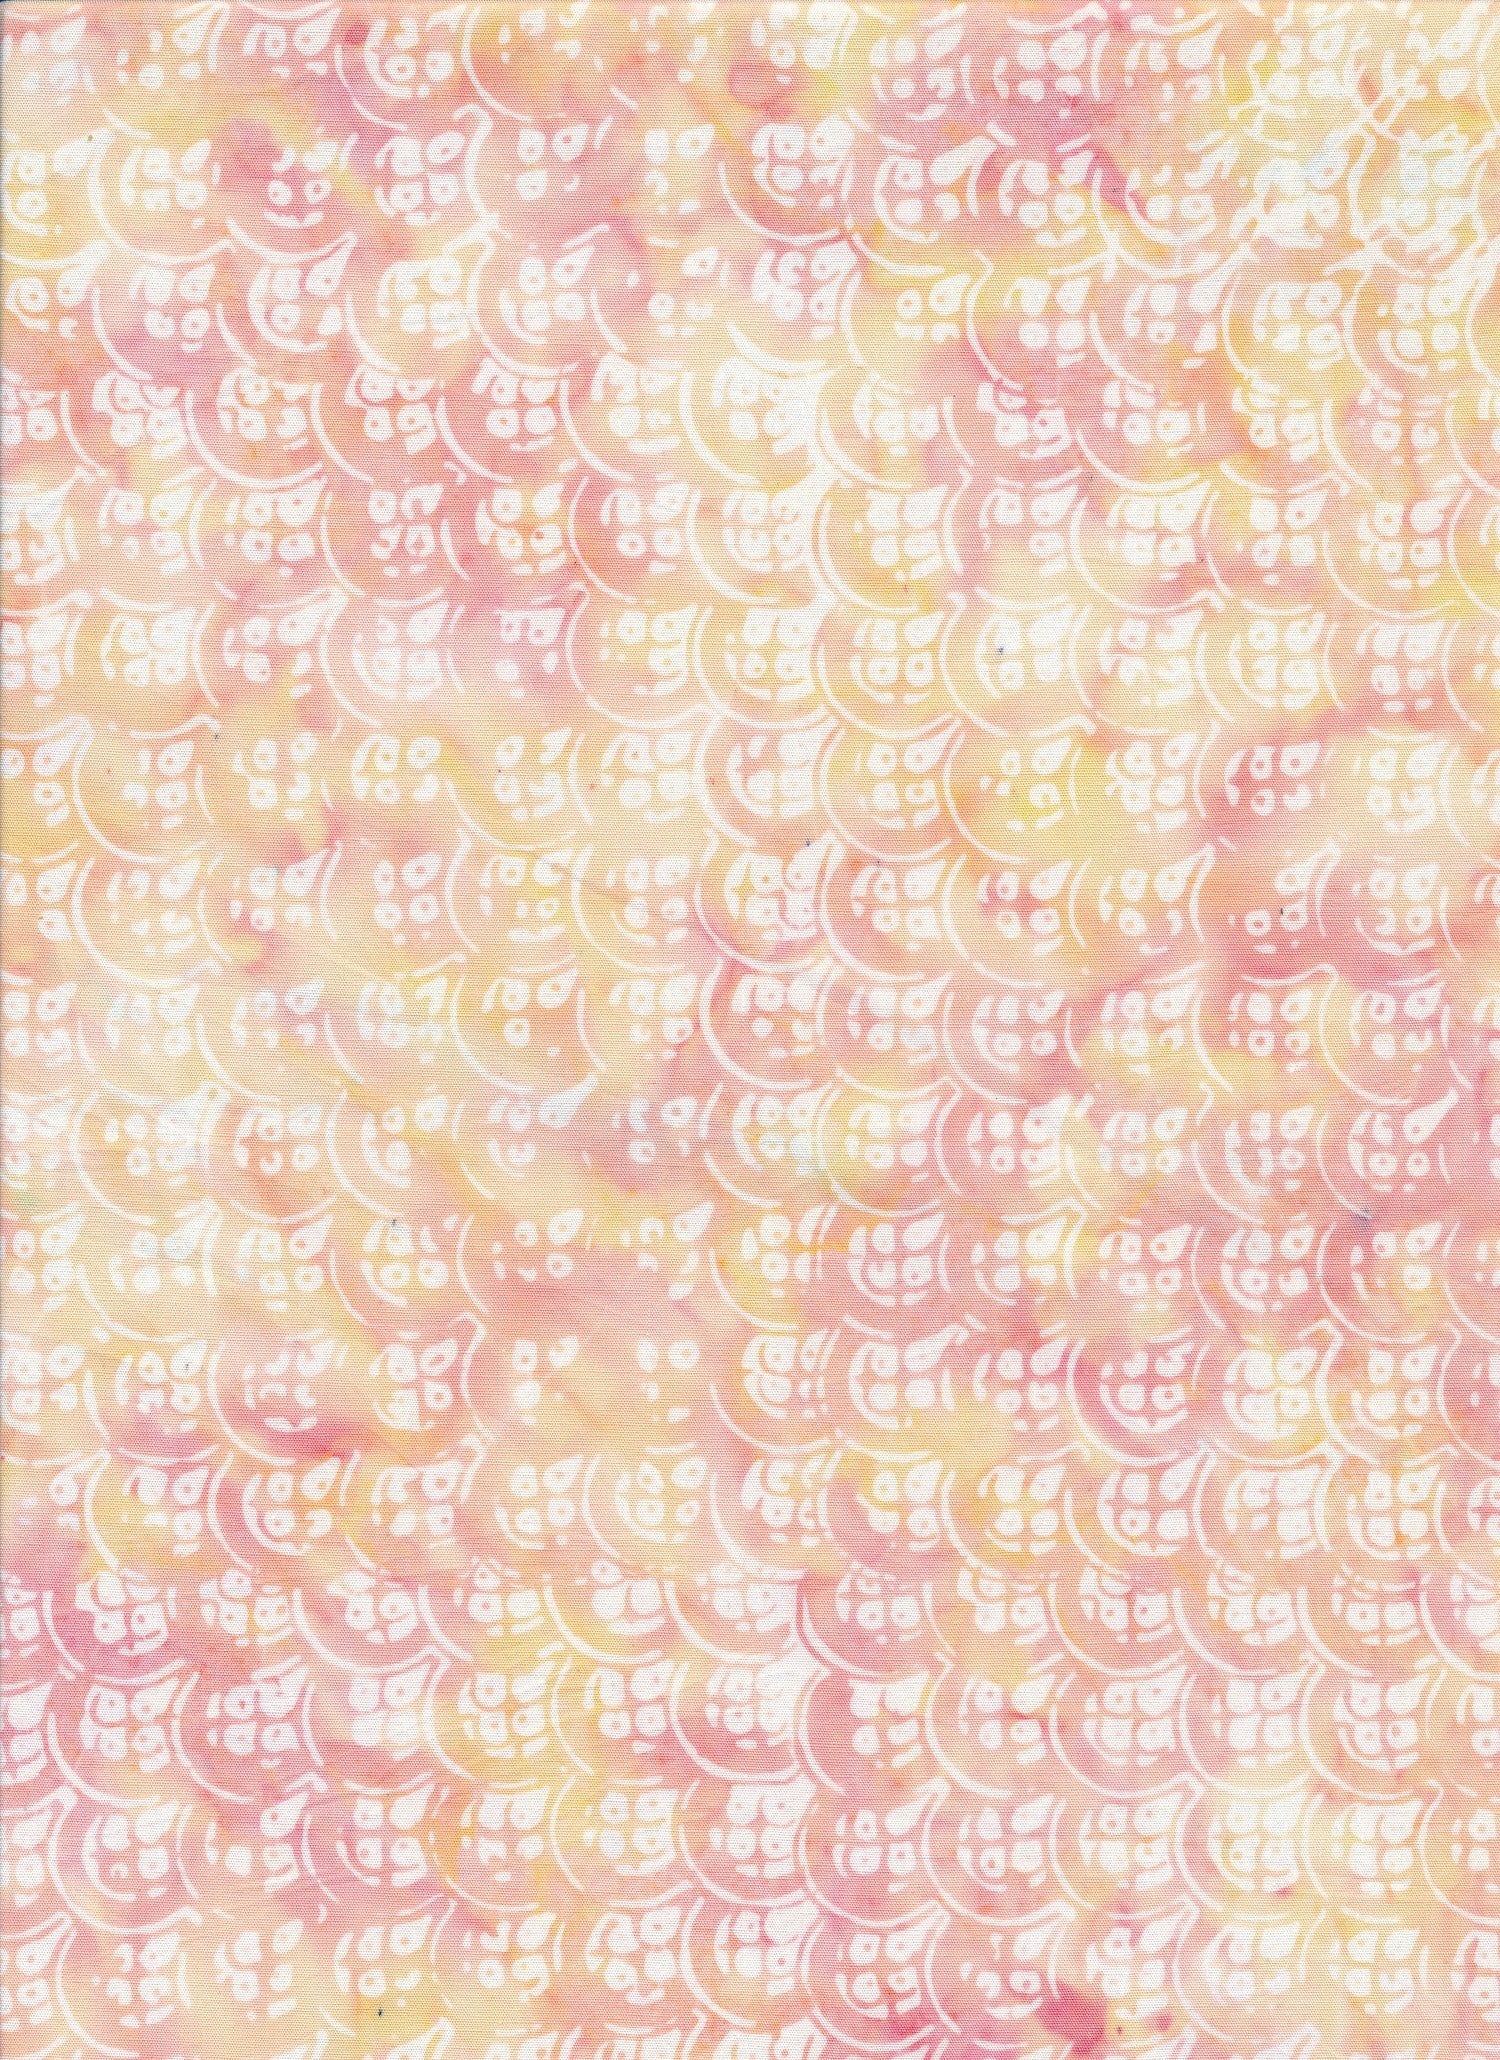 Majestic Batiks Quilt Fabric - Sunday Stroll Bubbles in Pink/Yellow - SUNDAY STROLL 698